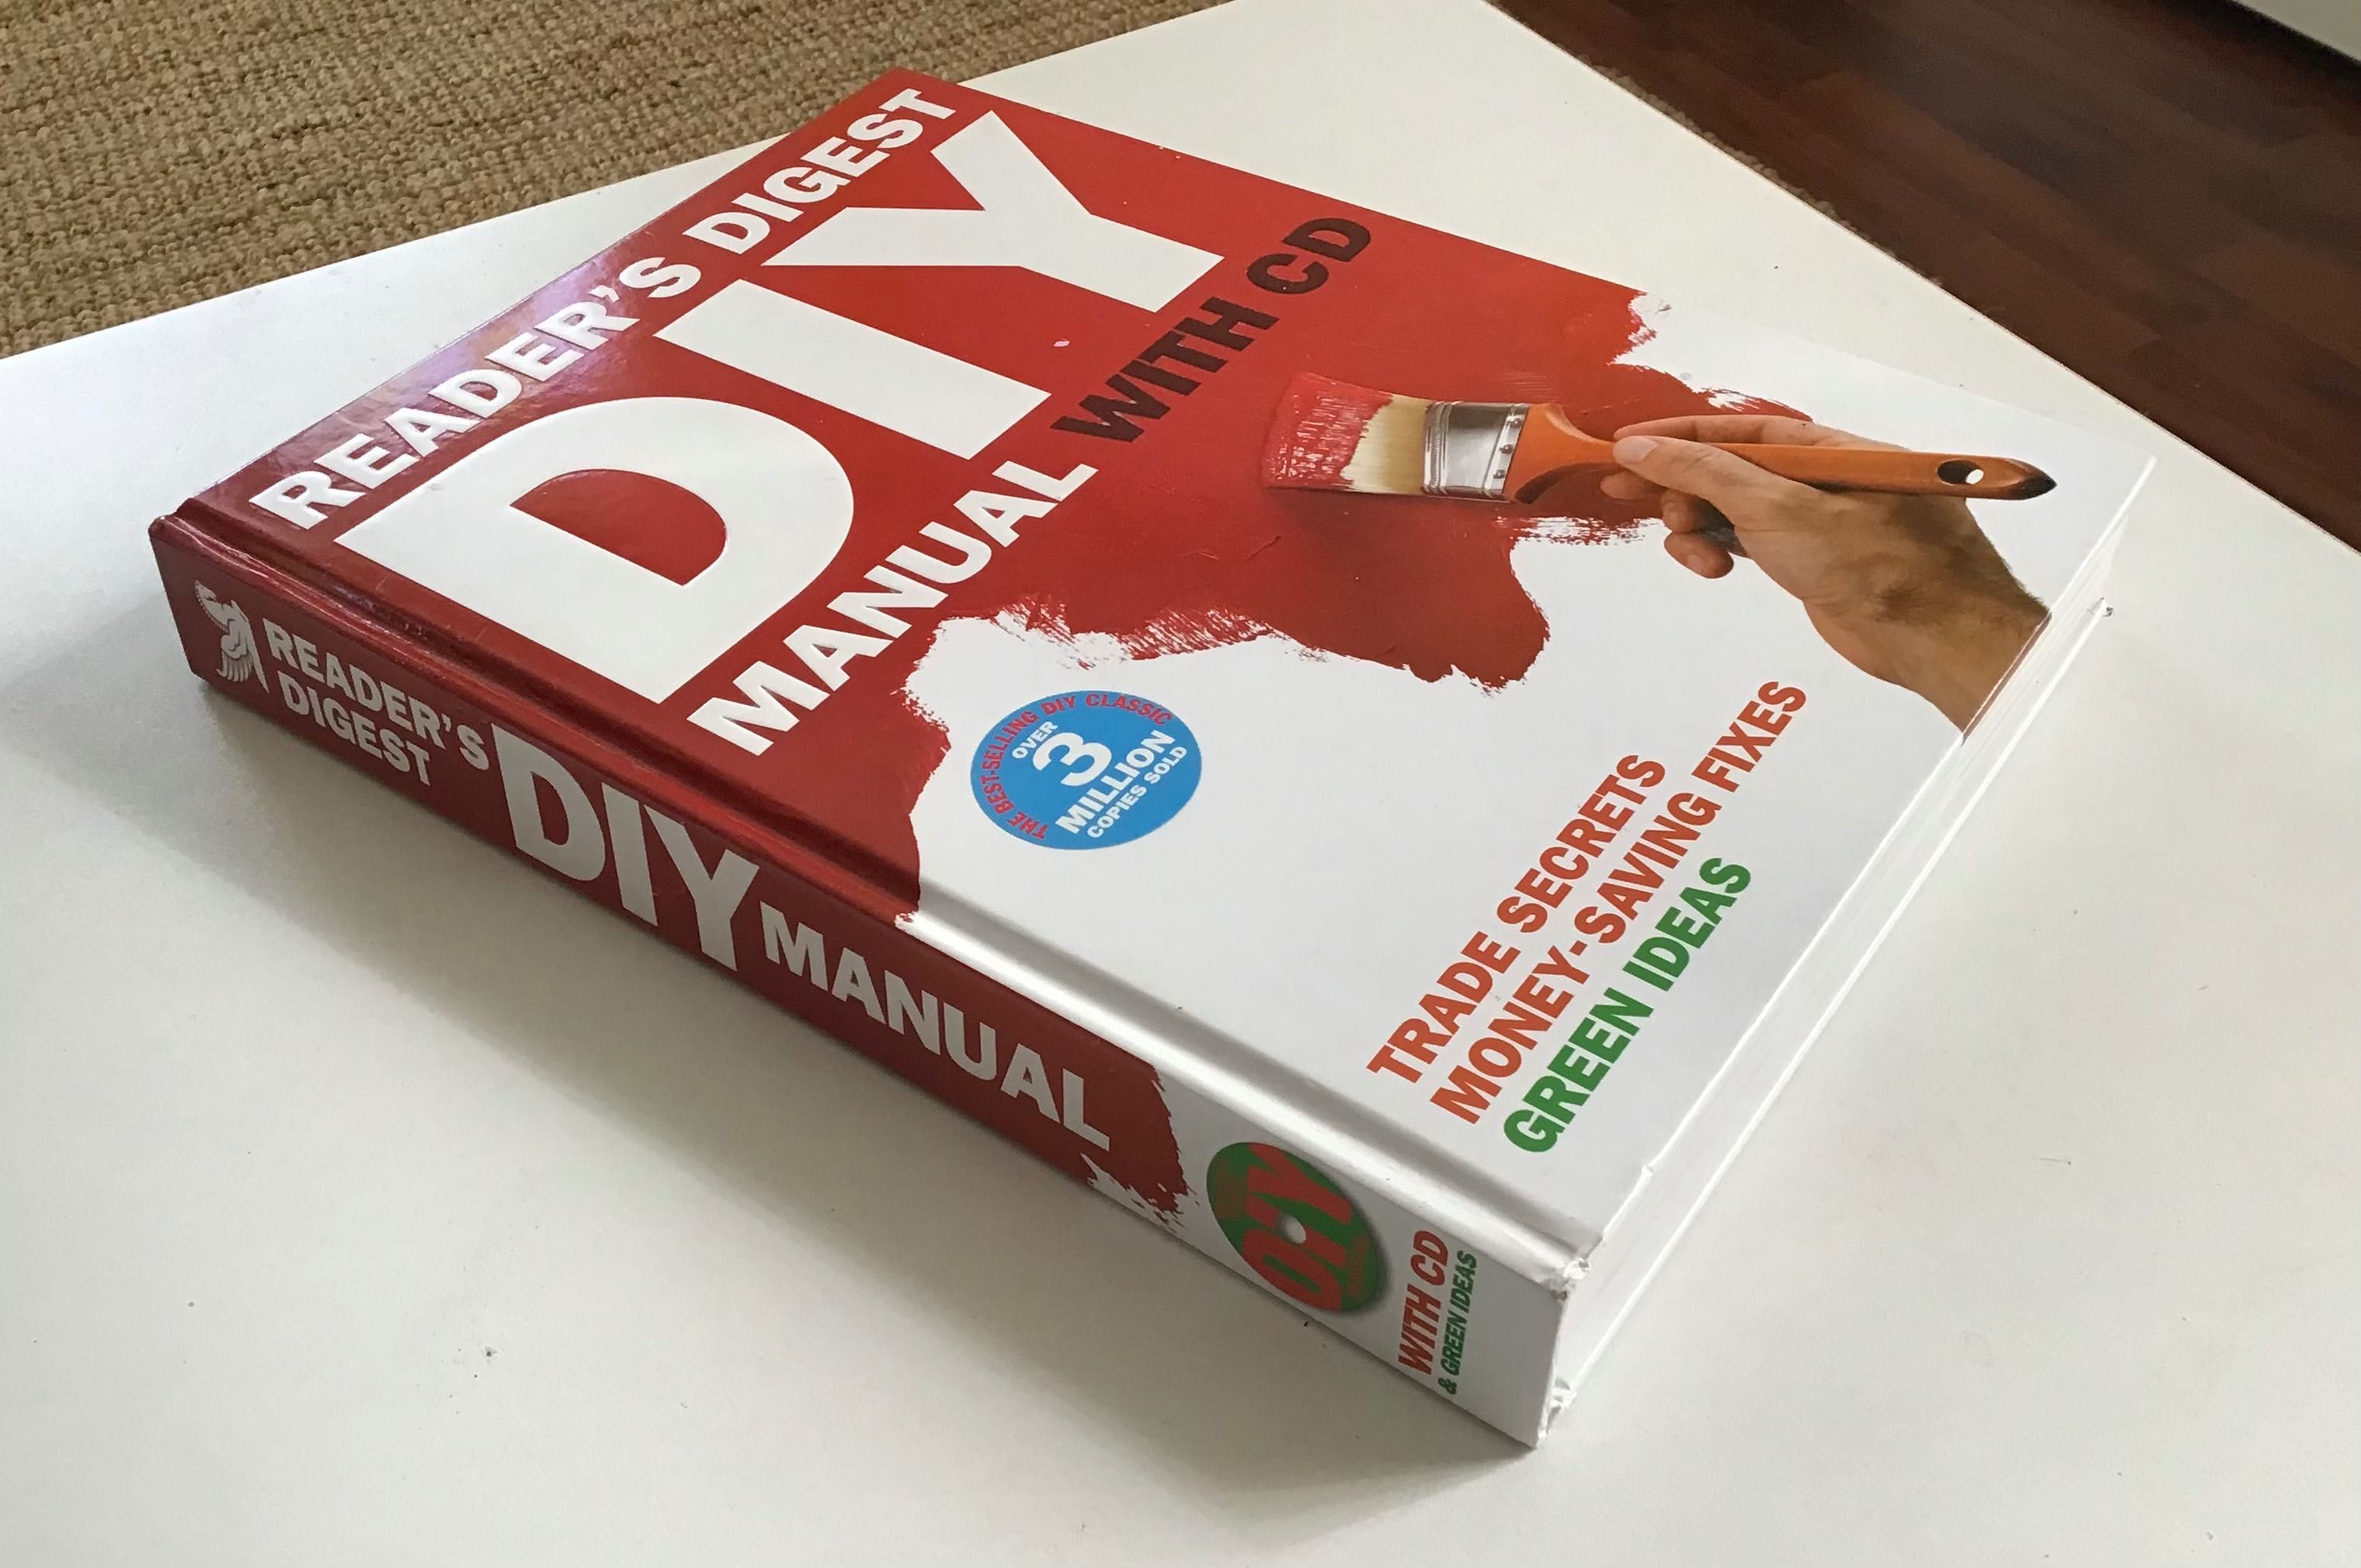 DIY manual with CD - Reader’s digest